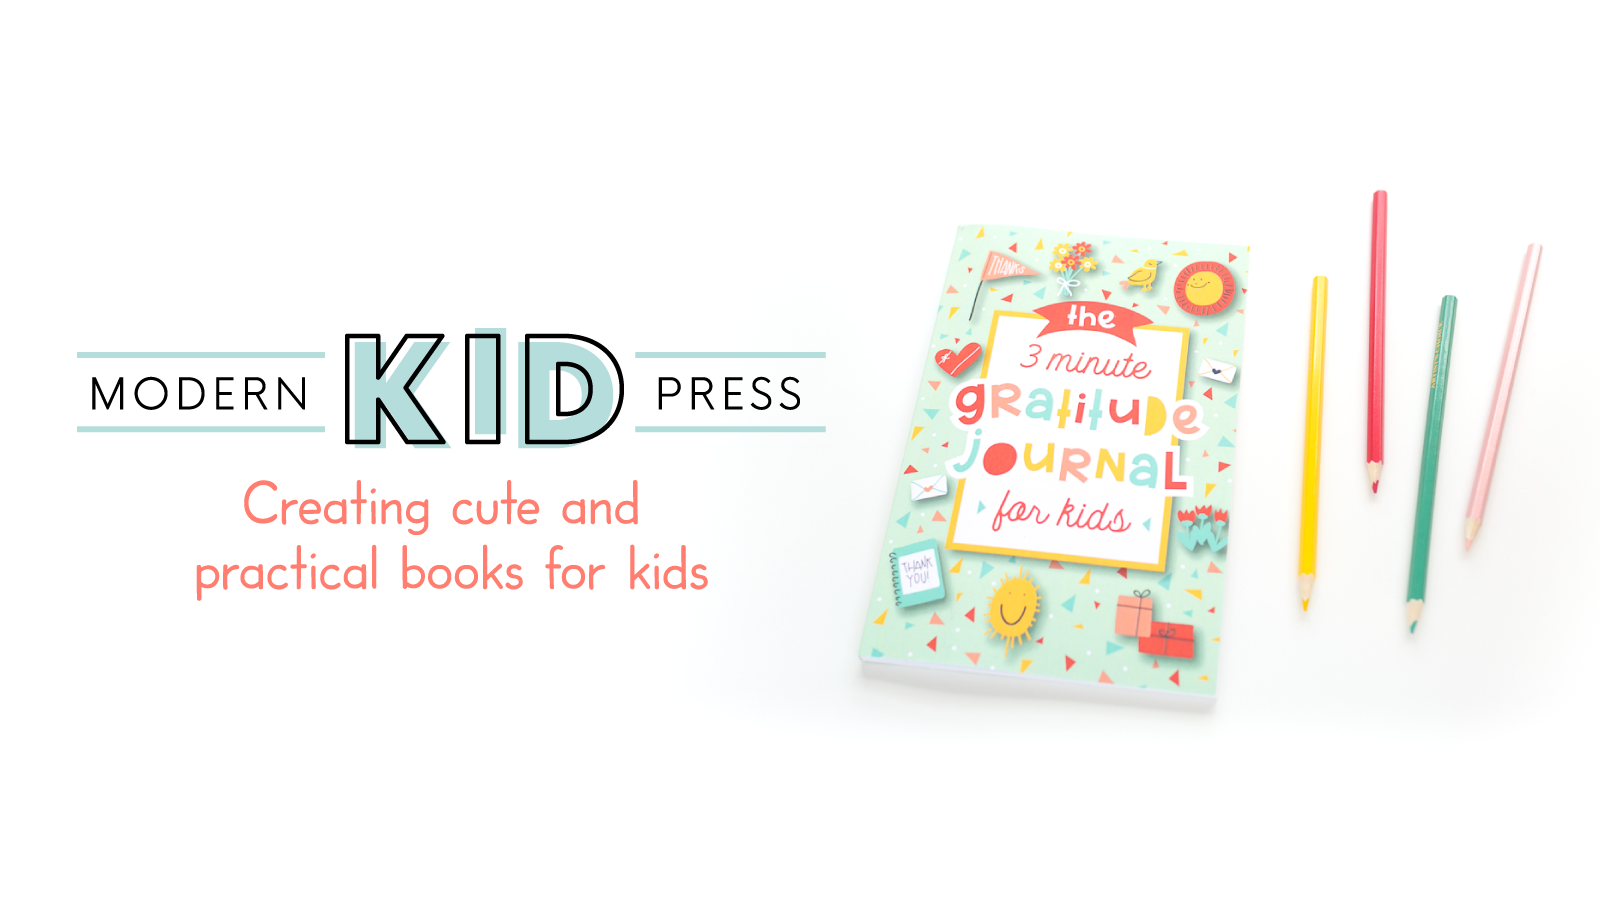 Sketch Book For Kids: Practice How To by Press, Modern Kid